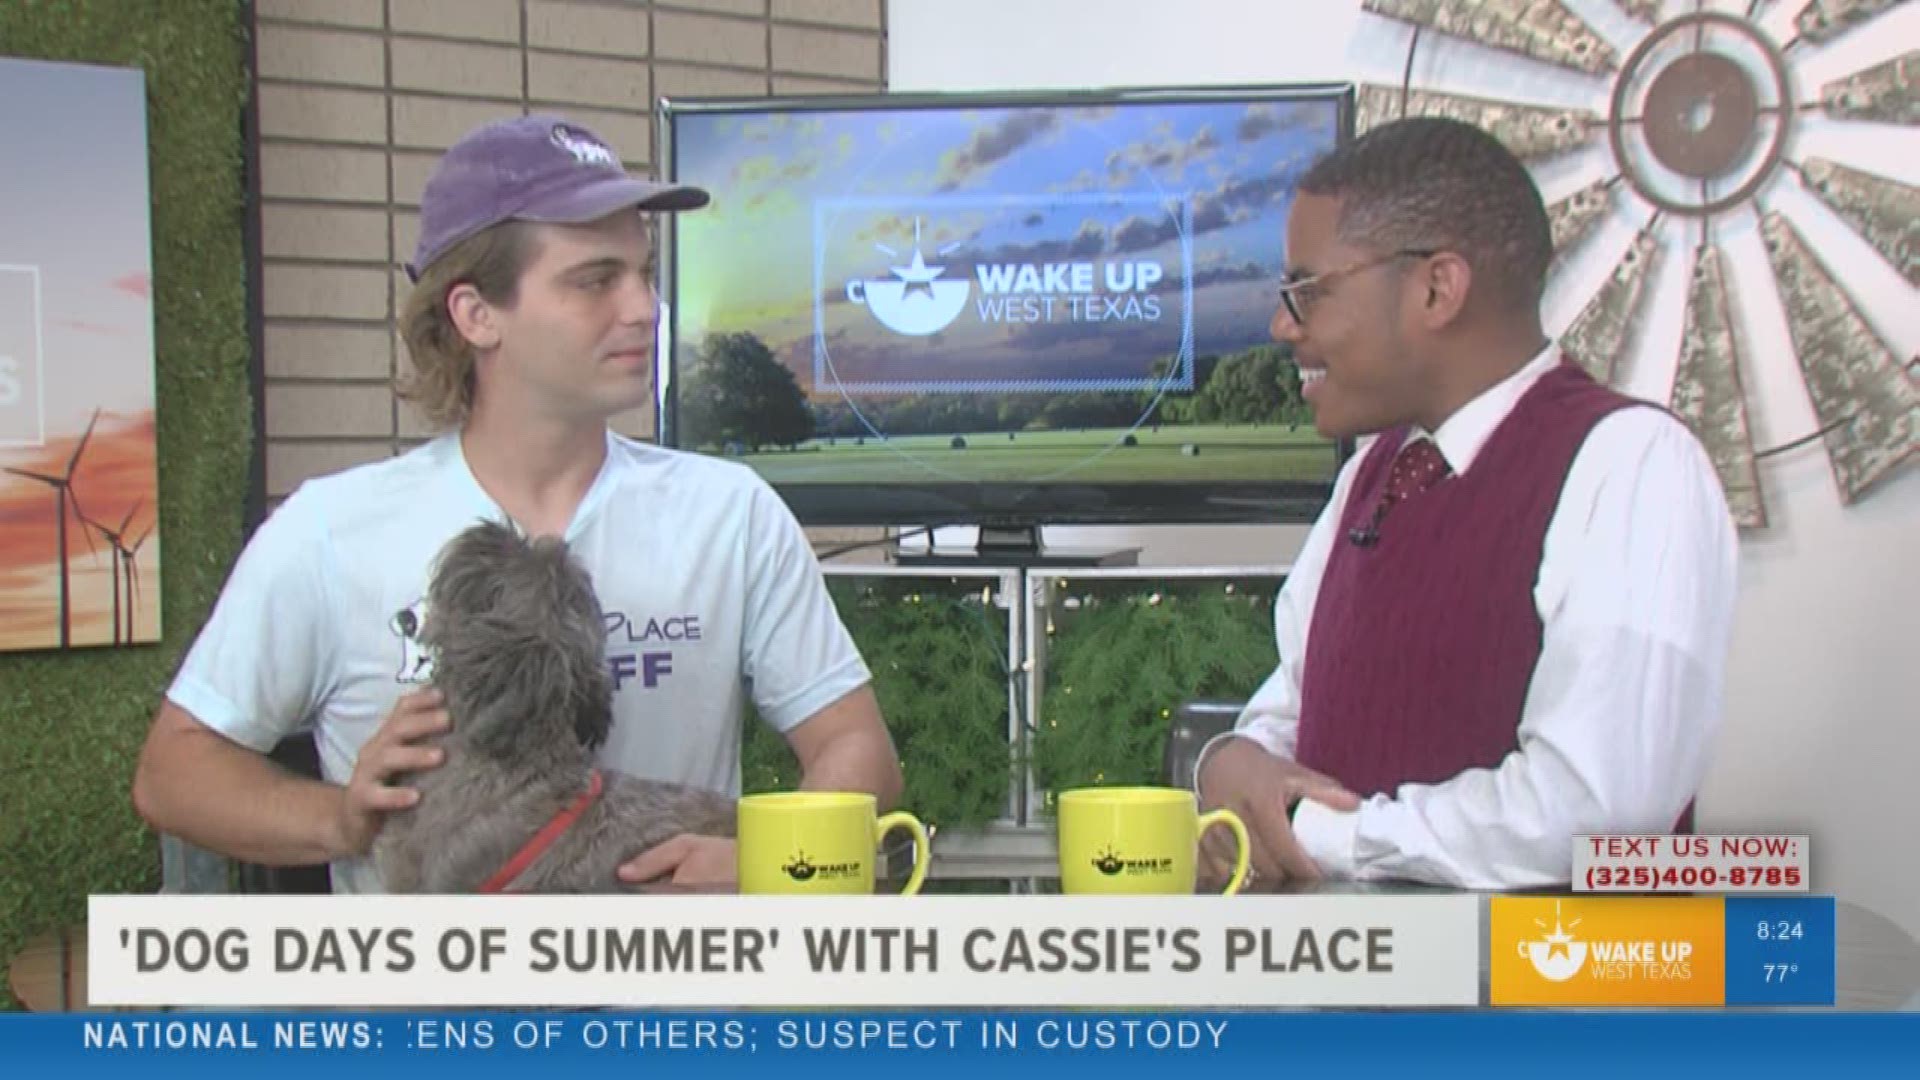 Our Malik Mingo spoke with a representative from Cassie's Place about the "Dog Days of Summer" concert scheduled for July 21 at The House of FiFi DuBois.